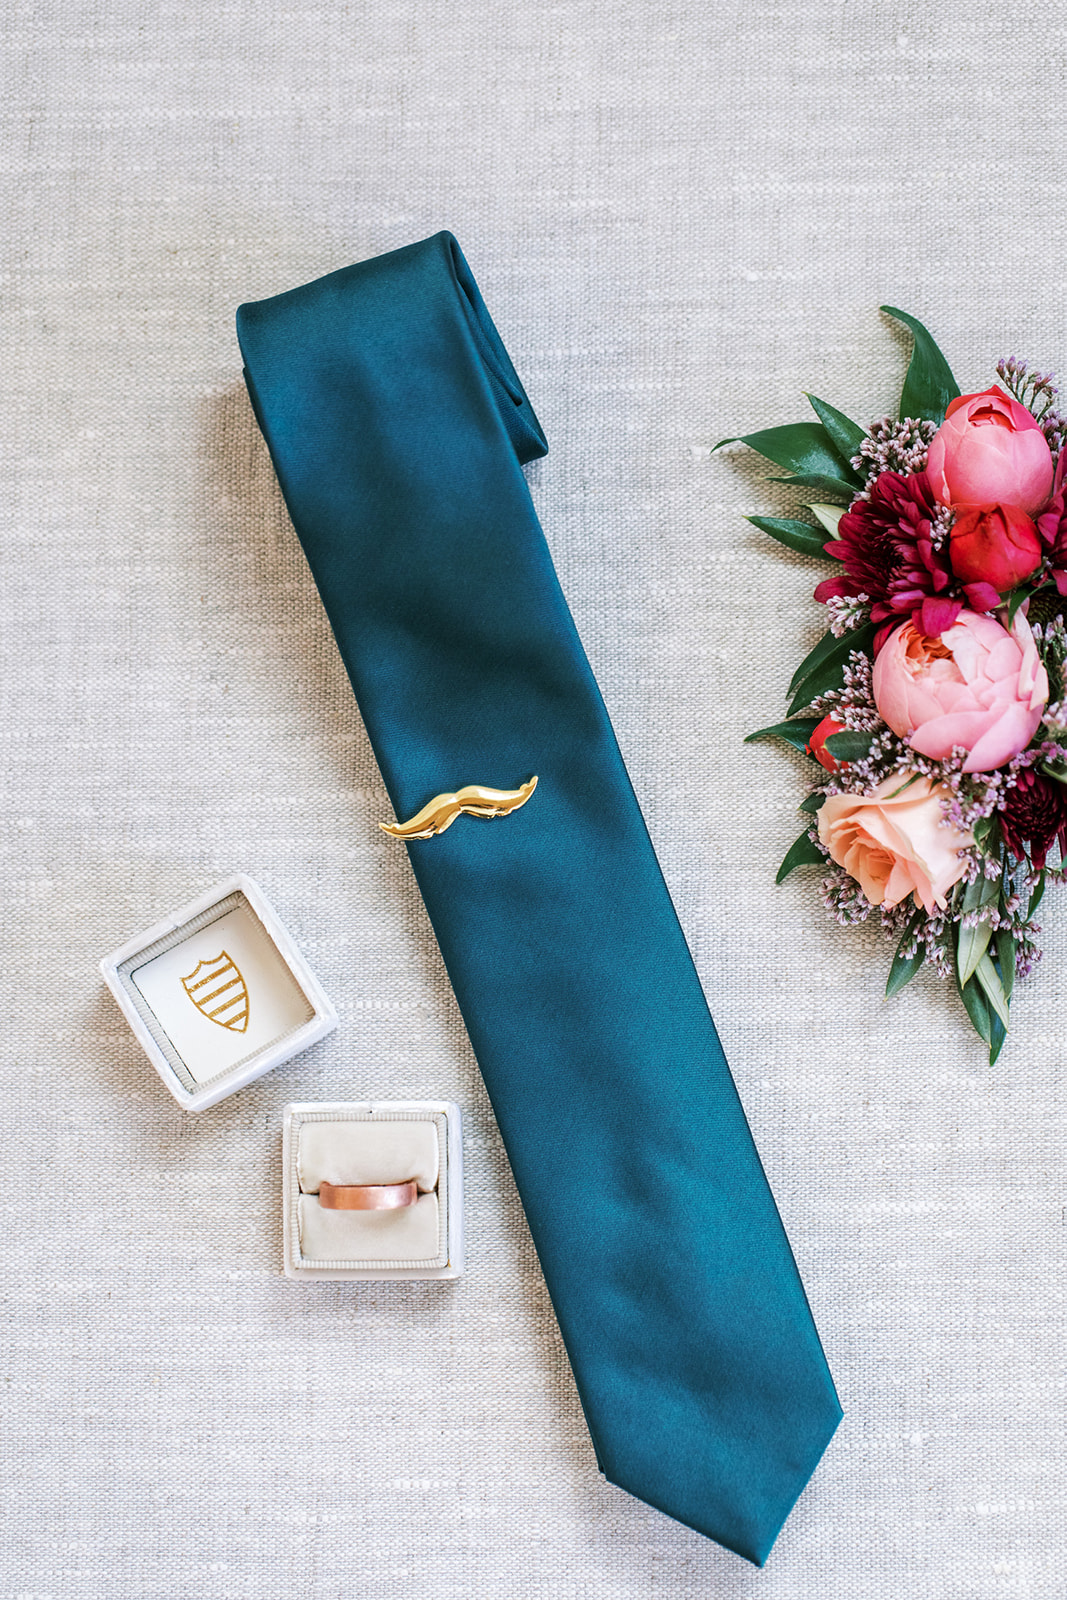 Colourful, vintage inspired pink boutonniere by Rose & Vine, and blue tie with mustache tie clip by Trinos Menswear.